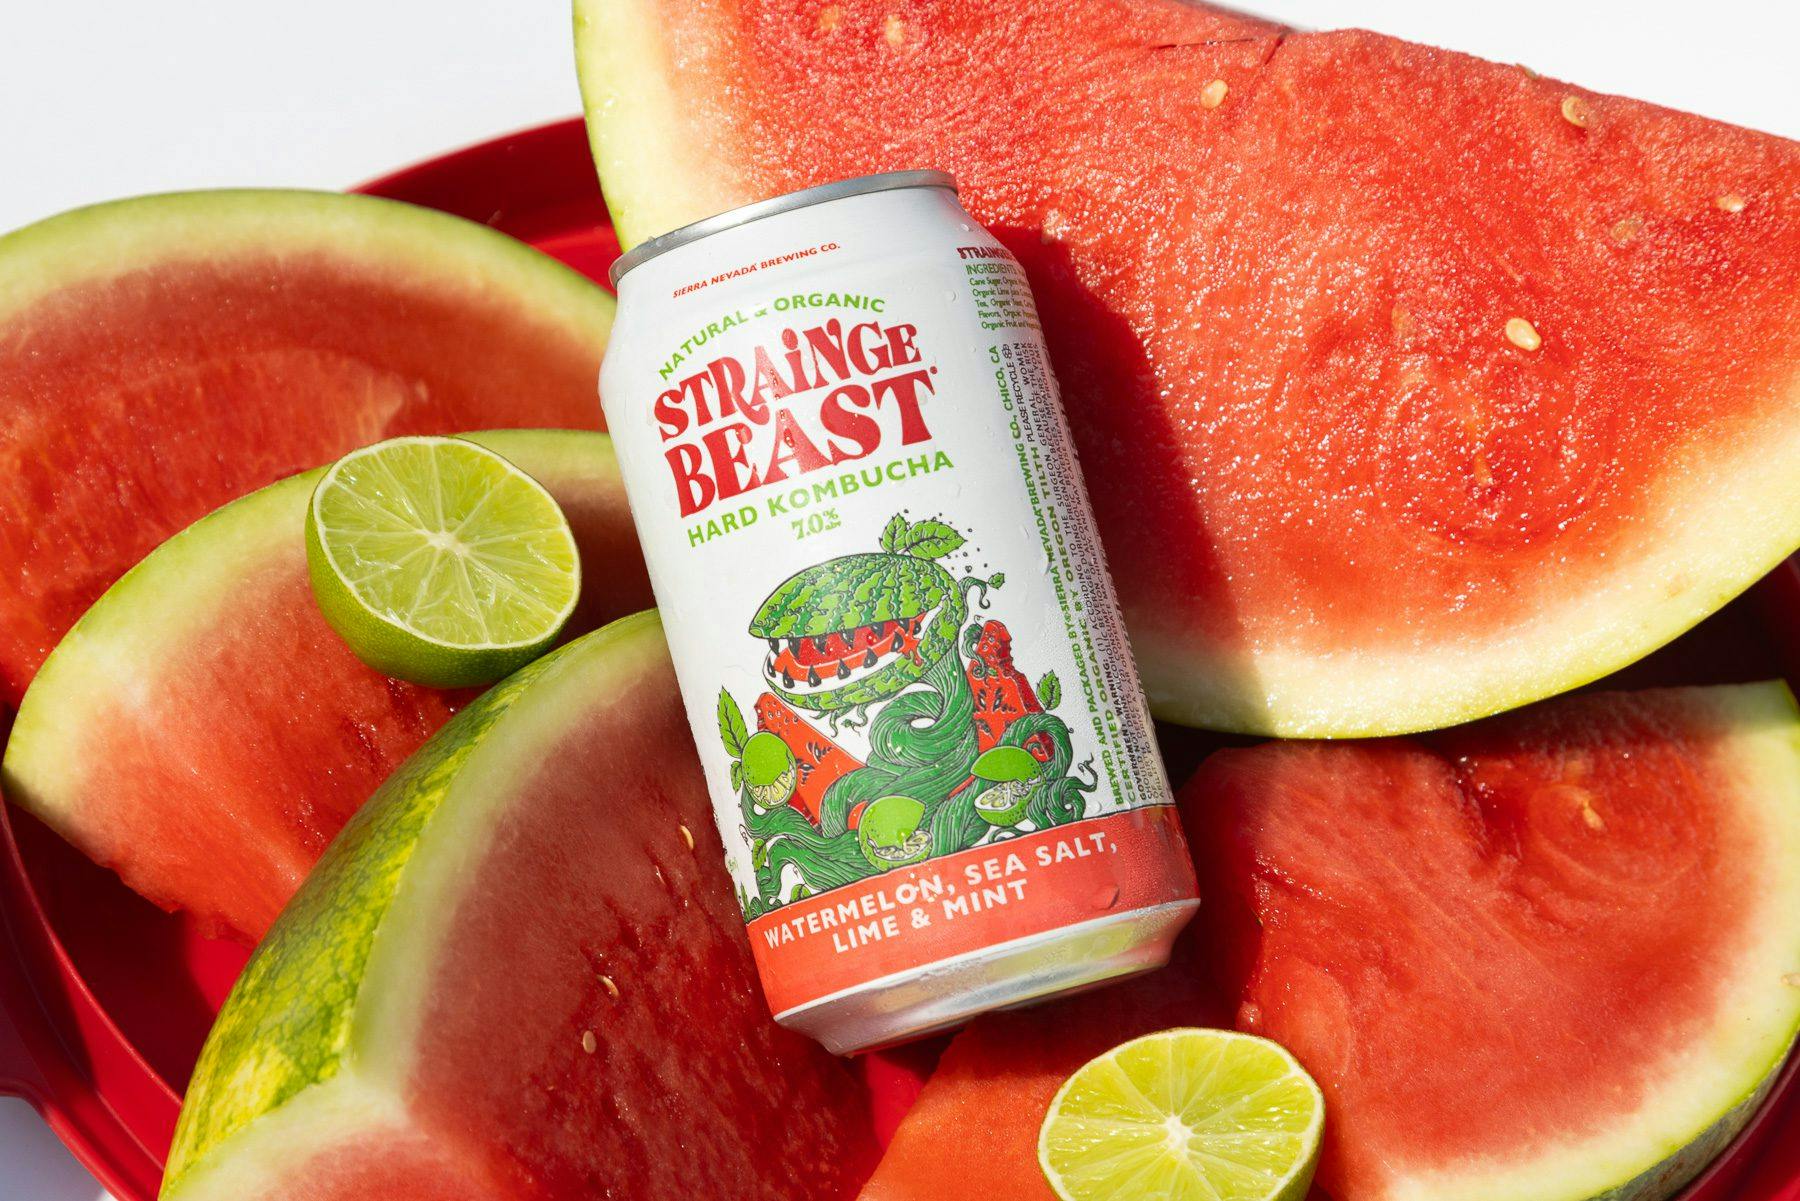 A can of Strainge Beast watermelon hard kombucha surrounded by sliced watermelon and limes